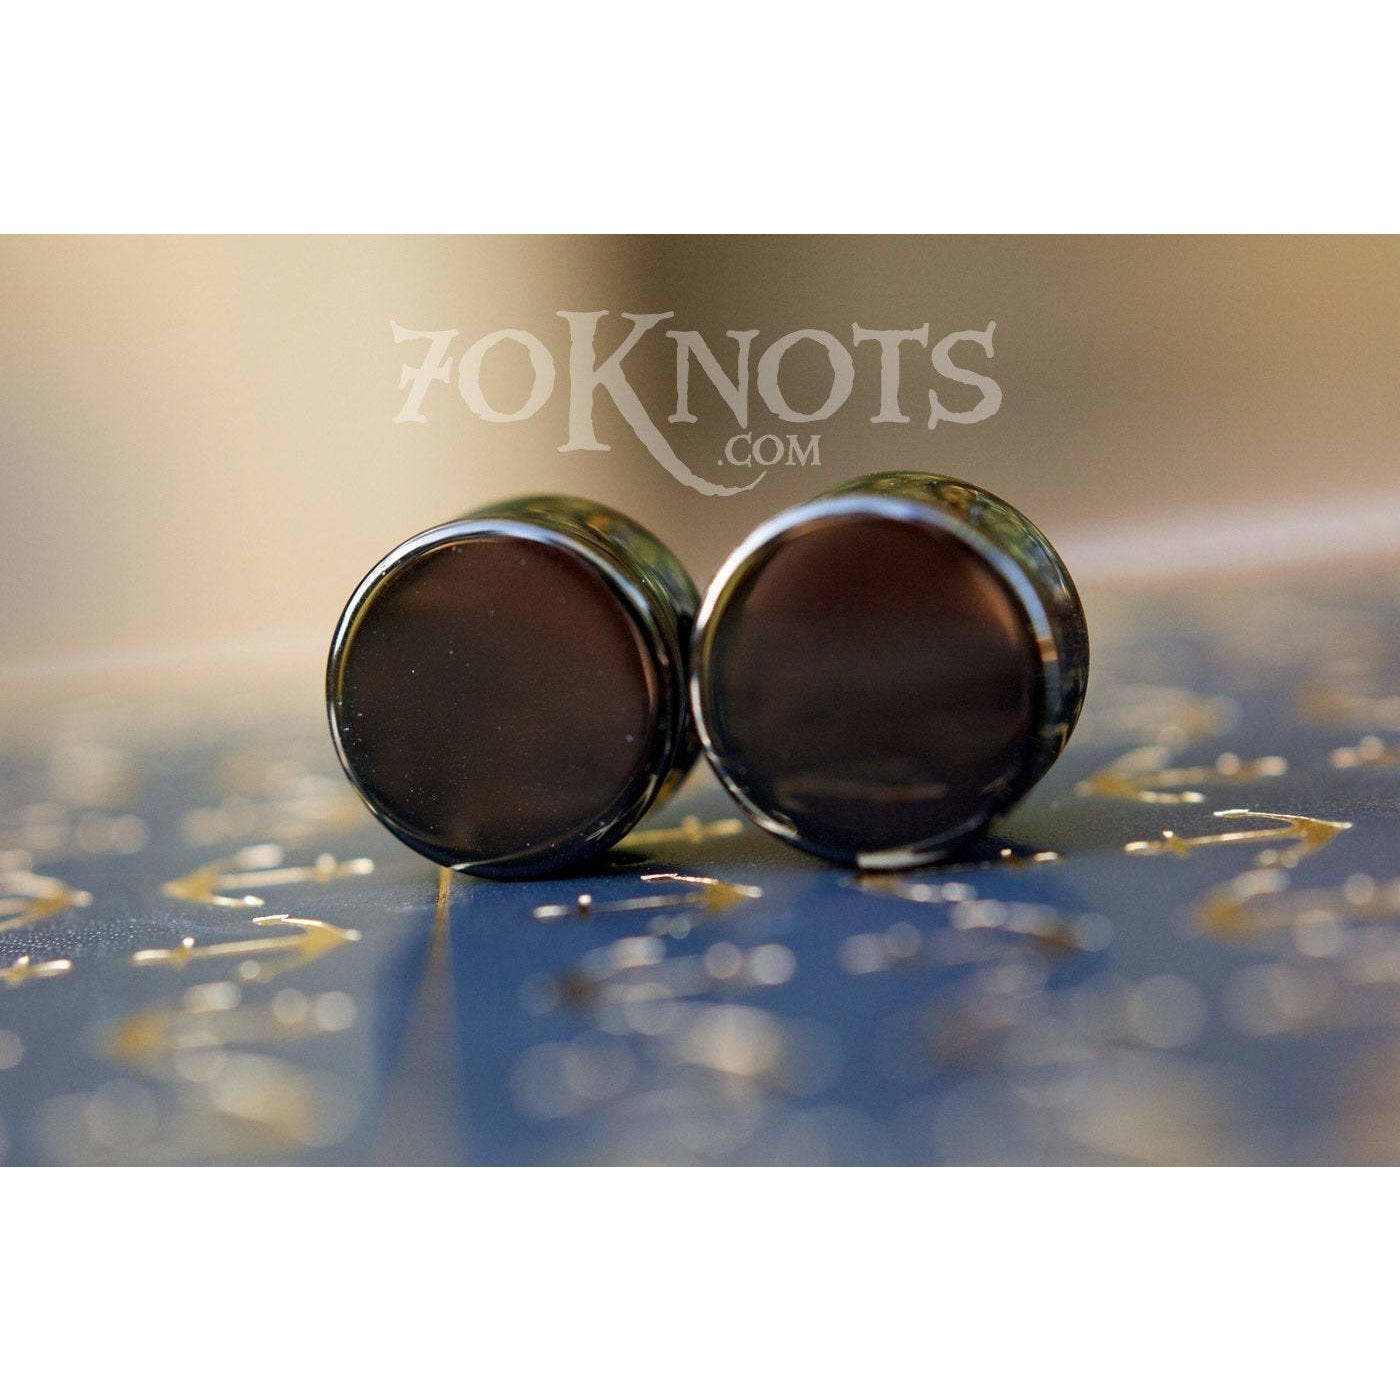 Obsidian Plugs, Double Flared, Pair - 70 Knots